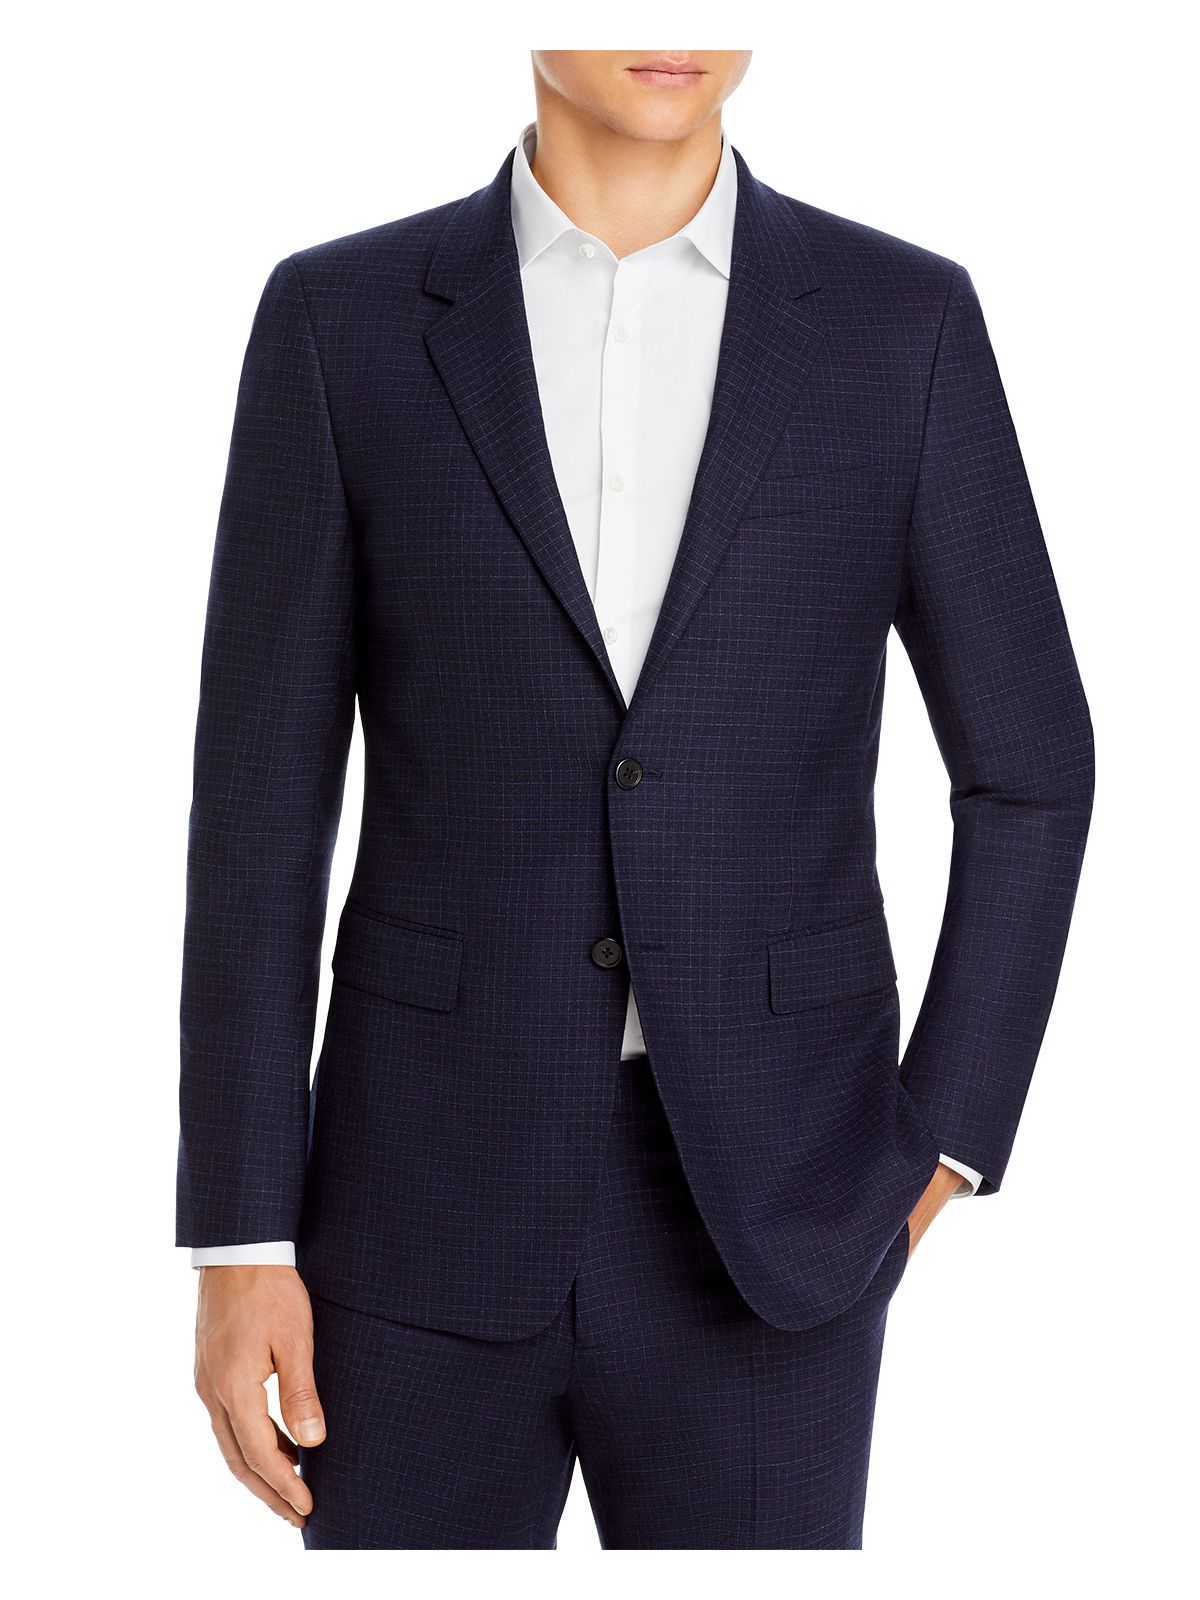 THEORY Mens Chambers Navy Single Breasted, Slim Fit Suit Separate Blazer Jacket 42L